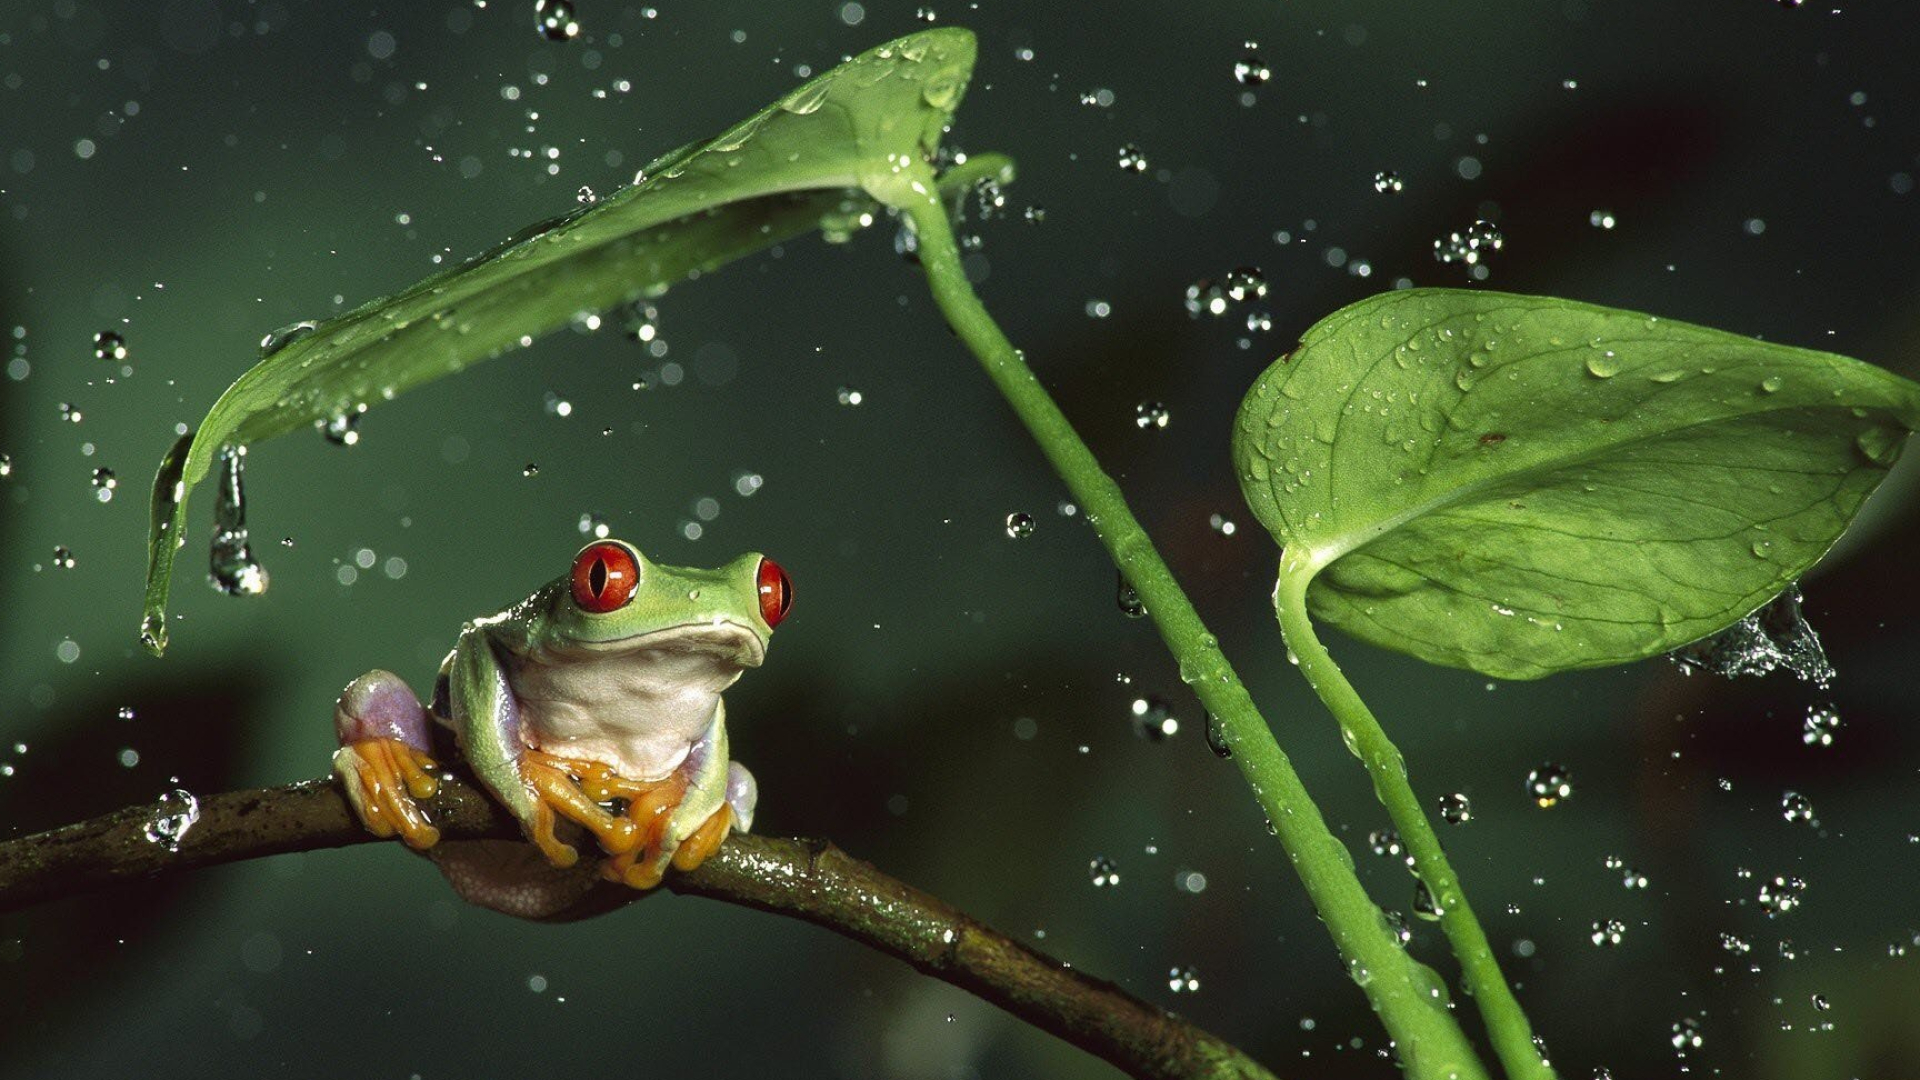 HD frog wallpapers, Clear and vibrant, High-definition detail, Desktop-worthy, 1920x1080 Full HD Desktop